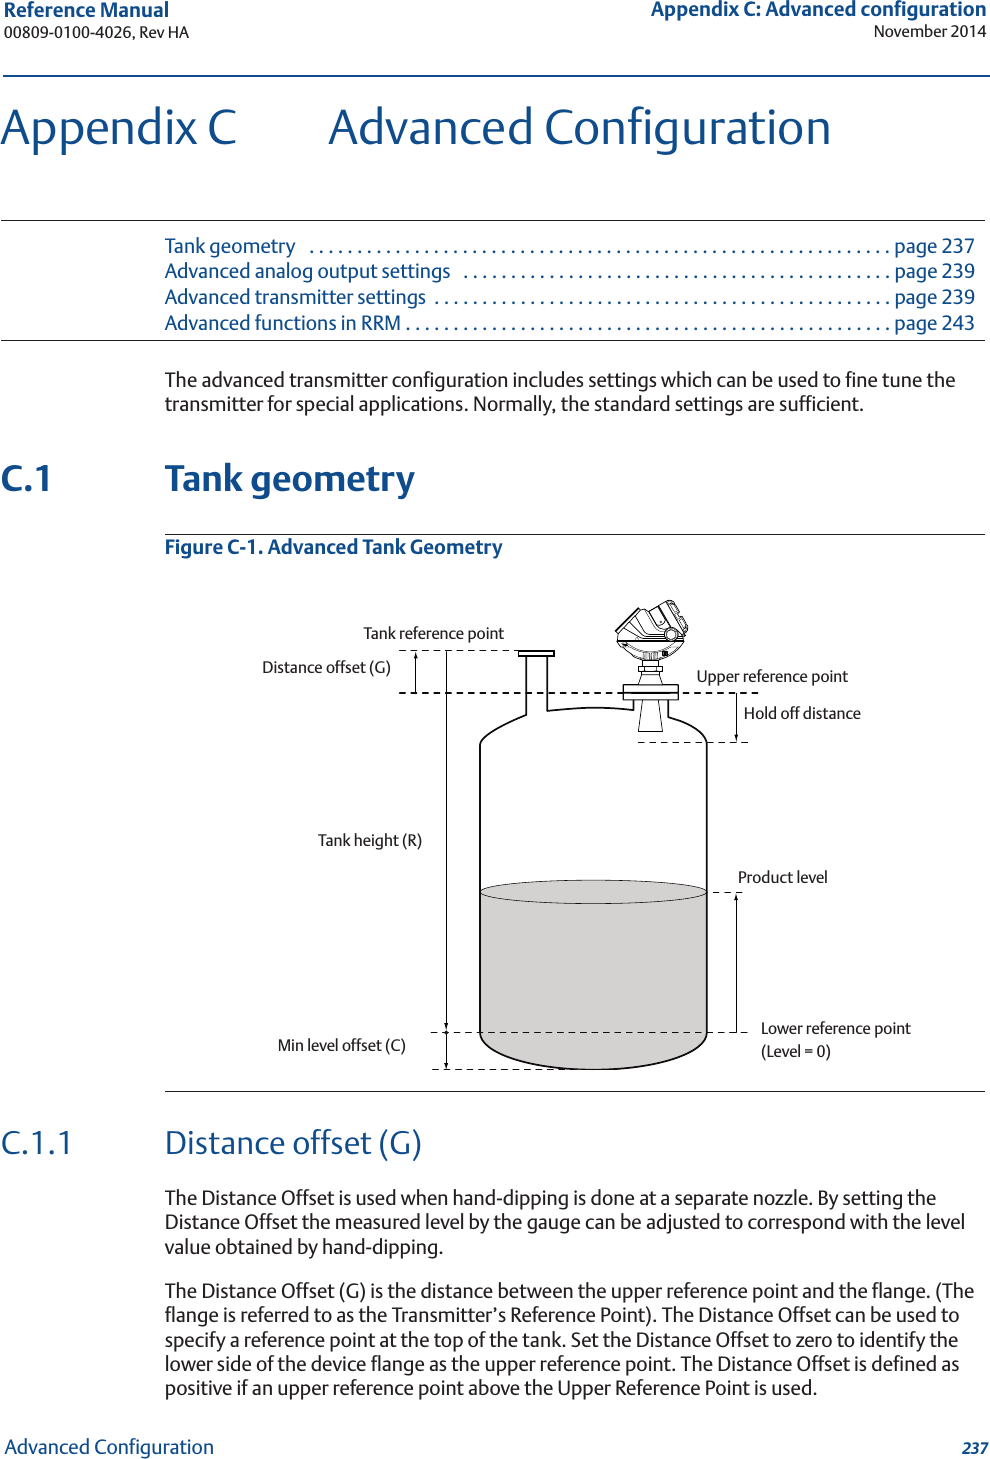 237Reference Manual 00809-0100-4026, Rev HAAppendix C: Advanced configurationNovember 2014Advanced ConfigurationAppendix C Advanced ConfigurationTank geometry   . . . . . . . . . . . . . . . . . . . . . . . . . . . . . . . . . . . . . . . . . . . . . . . . . . . . . . . . . . . . . page 237Advanced analog output settings   . . . . . . . . . . . . . . . . . . . . . . . . . . . . . . . . . . . . . . . . . . . . . page 239Advanced transmitter settings  . . . . . . . . . . . . . . . . . . . . . . . . . . . . . . . . . . . . . . . . . . . . . . . . page 239Advanced functions in RRM . . . . . . . . . . . . . . . . . . . . . . . . . . . . . . . . . . . . . . . . . . . . . . . . . . . page 243The advanced transmitter configuration includes settings which can be used to fine tune the transmitter for special applications. Normally, the standard settings are sufficient.C.1 Tank geometryFigure C-1. Advanced Tank GeometryC.1.1 Distance offset (G)The Distance Offset is used when hand-dipping is done at a separate nozzle. By setting the Distance Offset the measured level by the gauge can be adjusted to correspond with the level value obtained by hand-dipping.The Distance Offset (G) is the distance between the upper reference point and the flange. (The flange is referred to as the Transmitter’s Reference Point). The Distance Offset can be used to specify a reference point at the top of the tank. Set the Distance Offset to zero to identify the lower side of the device flange as the upper reference point. The Distance Offset is defined as positive if an upper reference point above the Upper Reference Point is used. Tank height (R)Product levelTank reference pointDistance offset (G)Min level offset (C)Upper reference pointHold off distanceLower reference point(Level = 0)